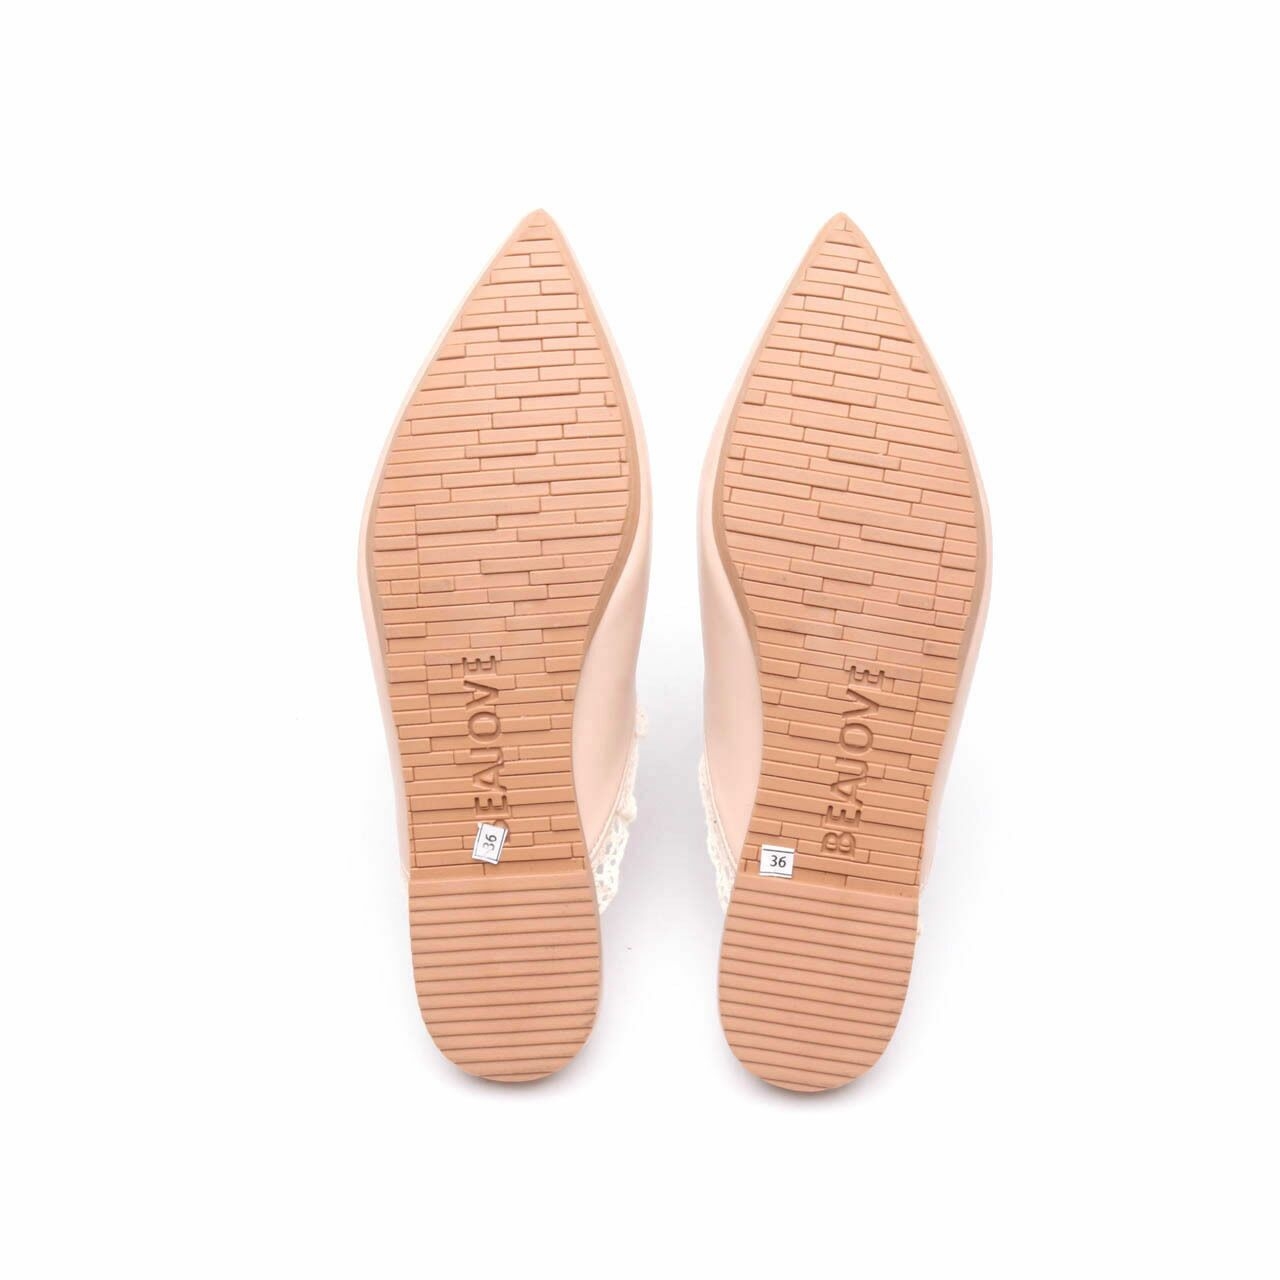 Private Collection Beige Mules Sandals